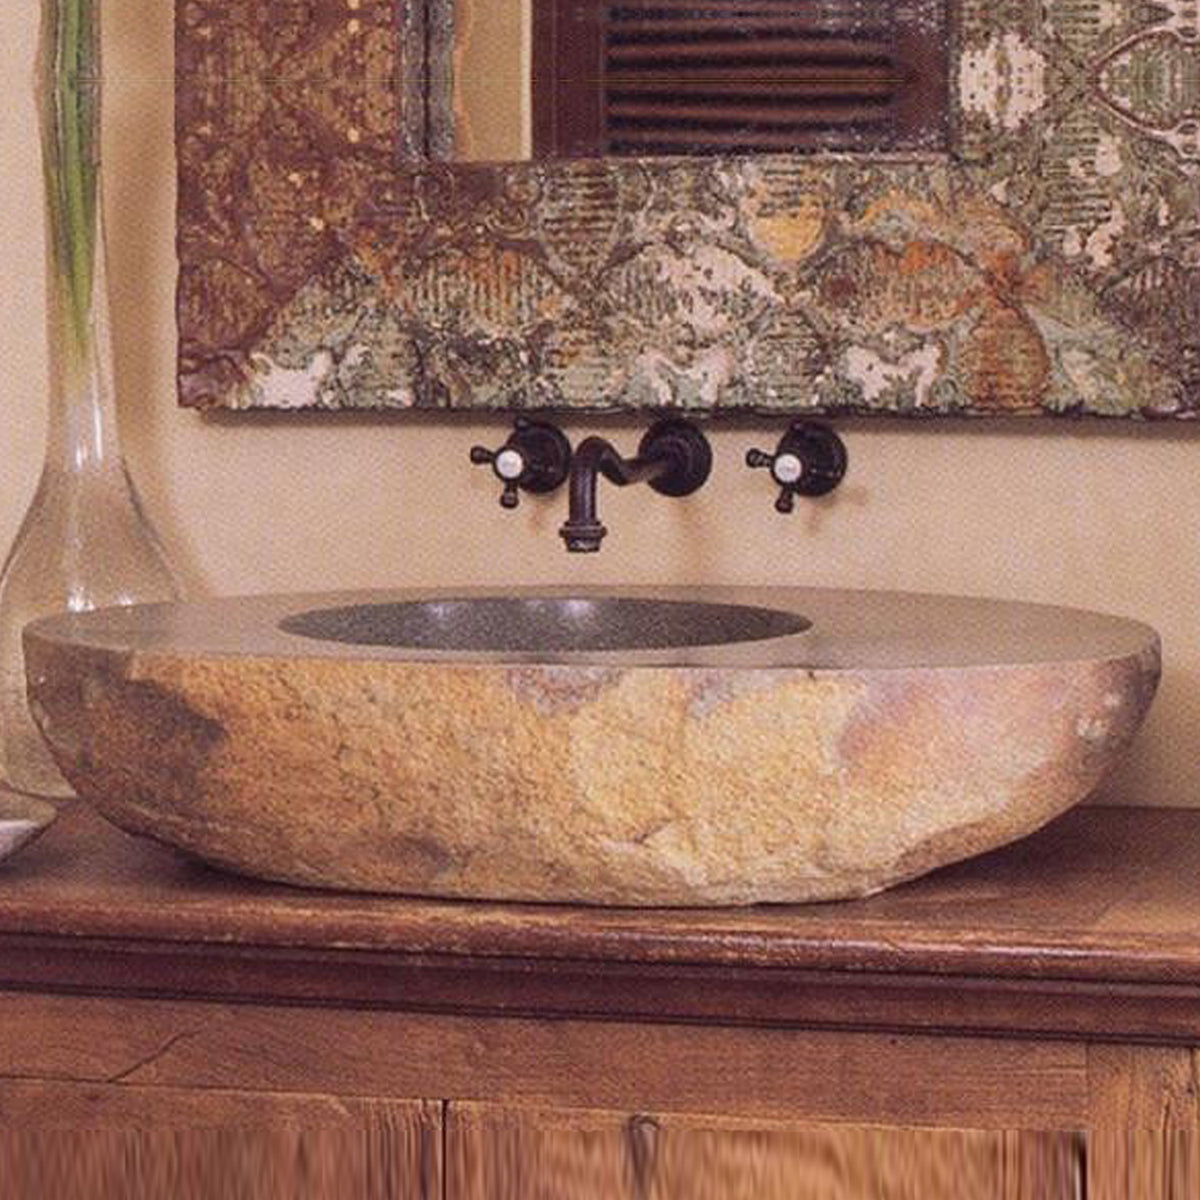 Large Natural Sink, bathroom lavatory sink with natural exterior and polished top and interior. image 1 of 1